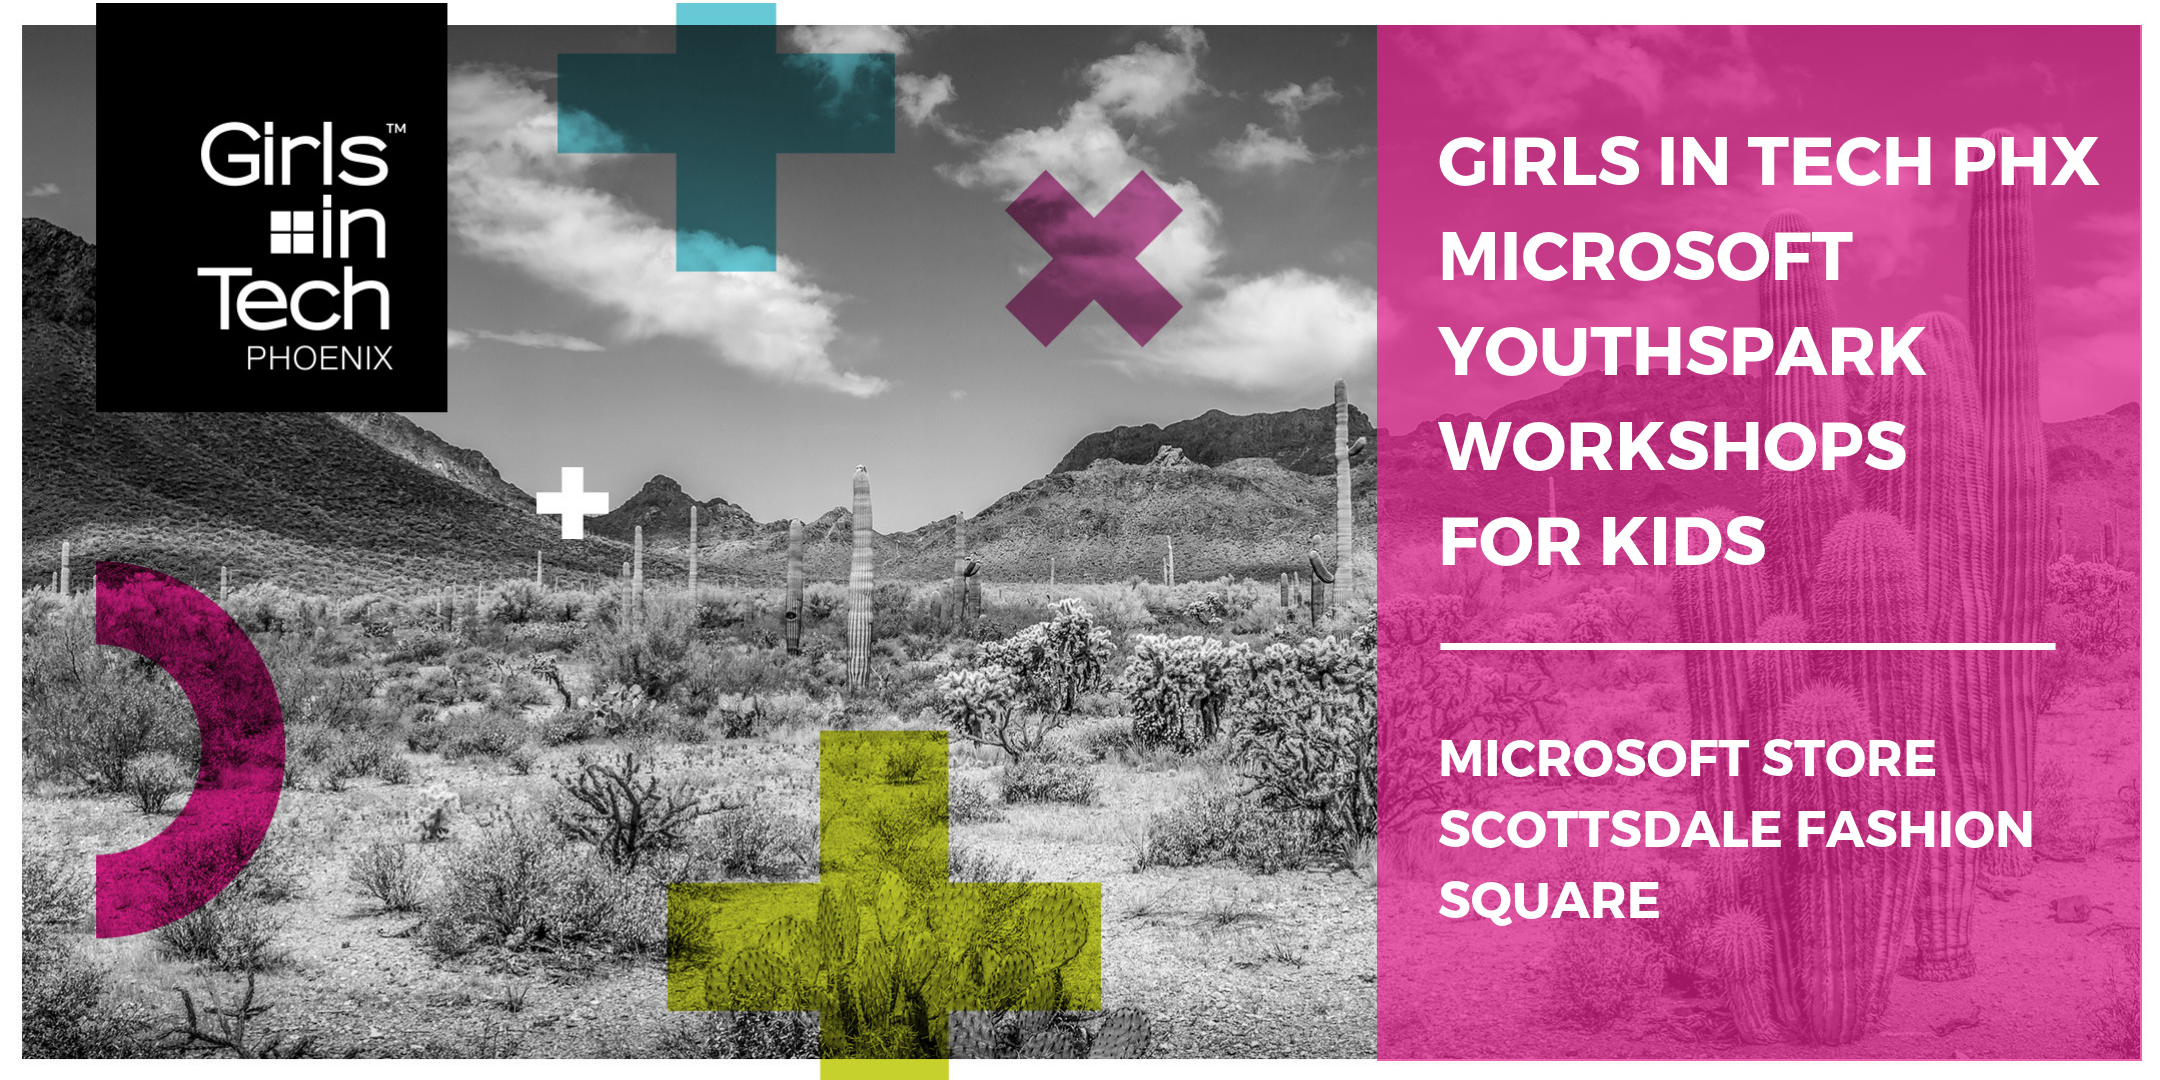 Girls in Tech - Microsoft YouthSpark Workshop for Kids